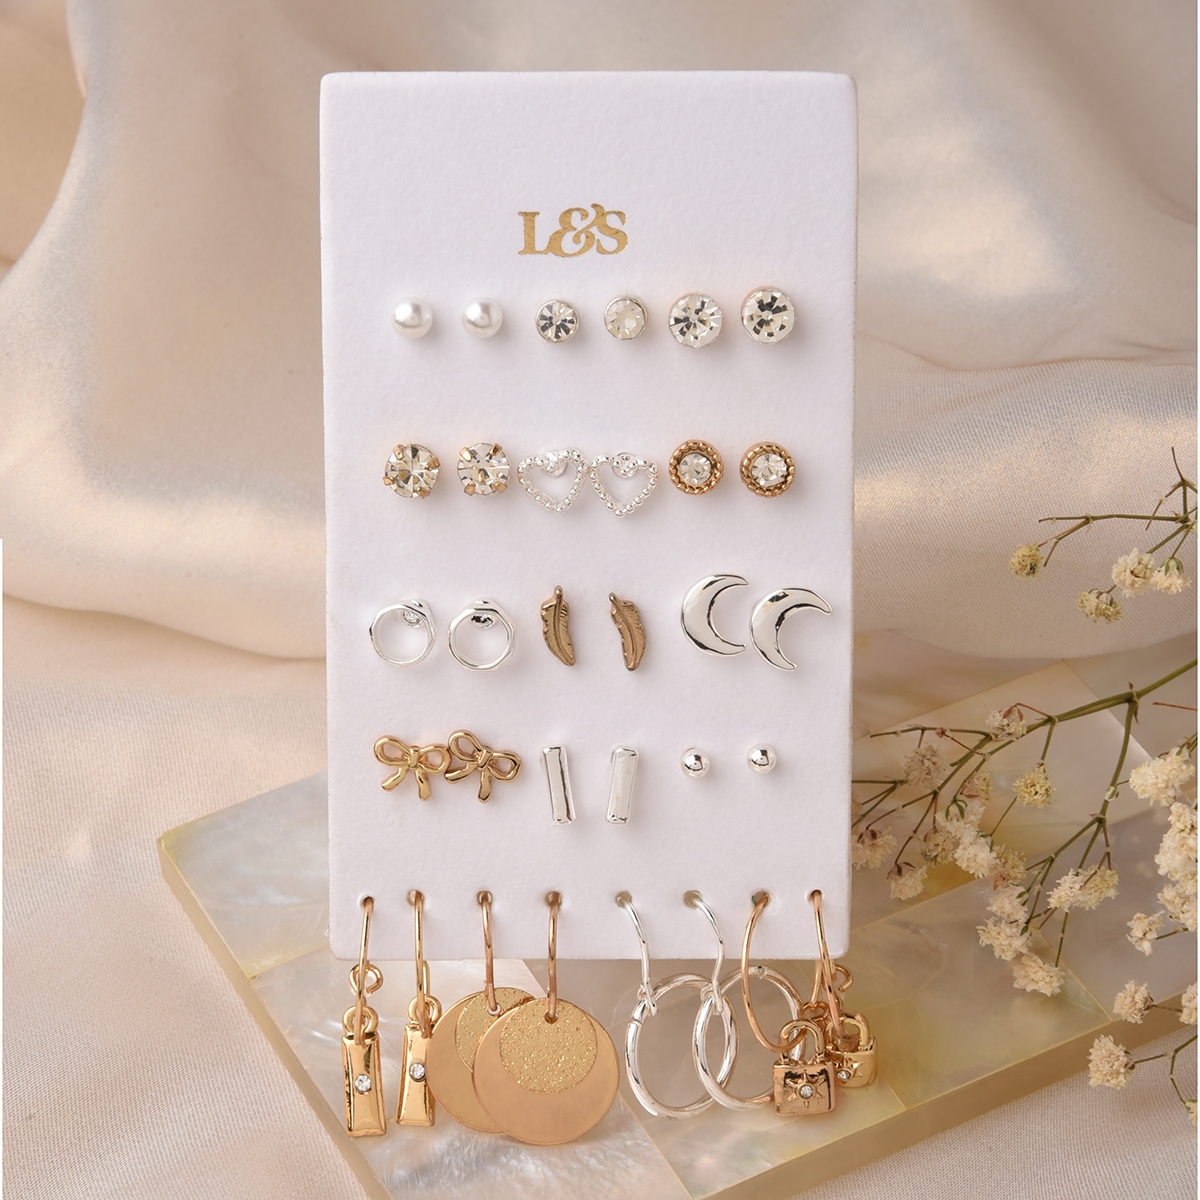 Lilly & sparkle | Lilly & Sparkle Stud And 4 Drop Earrings Pack Set Of 12